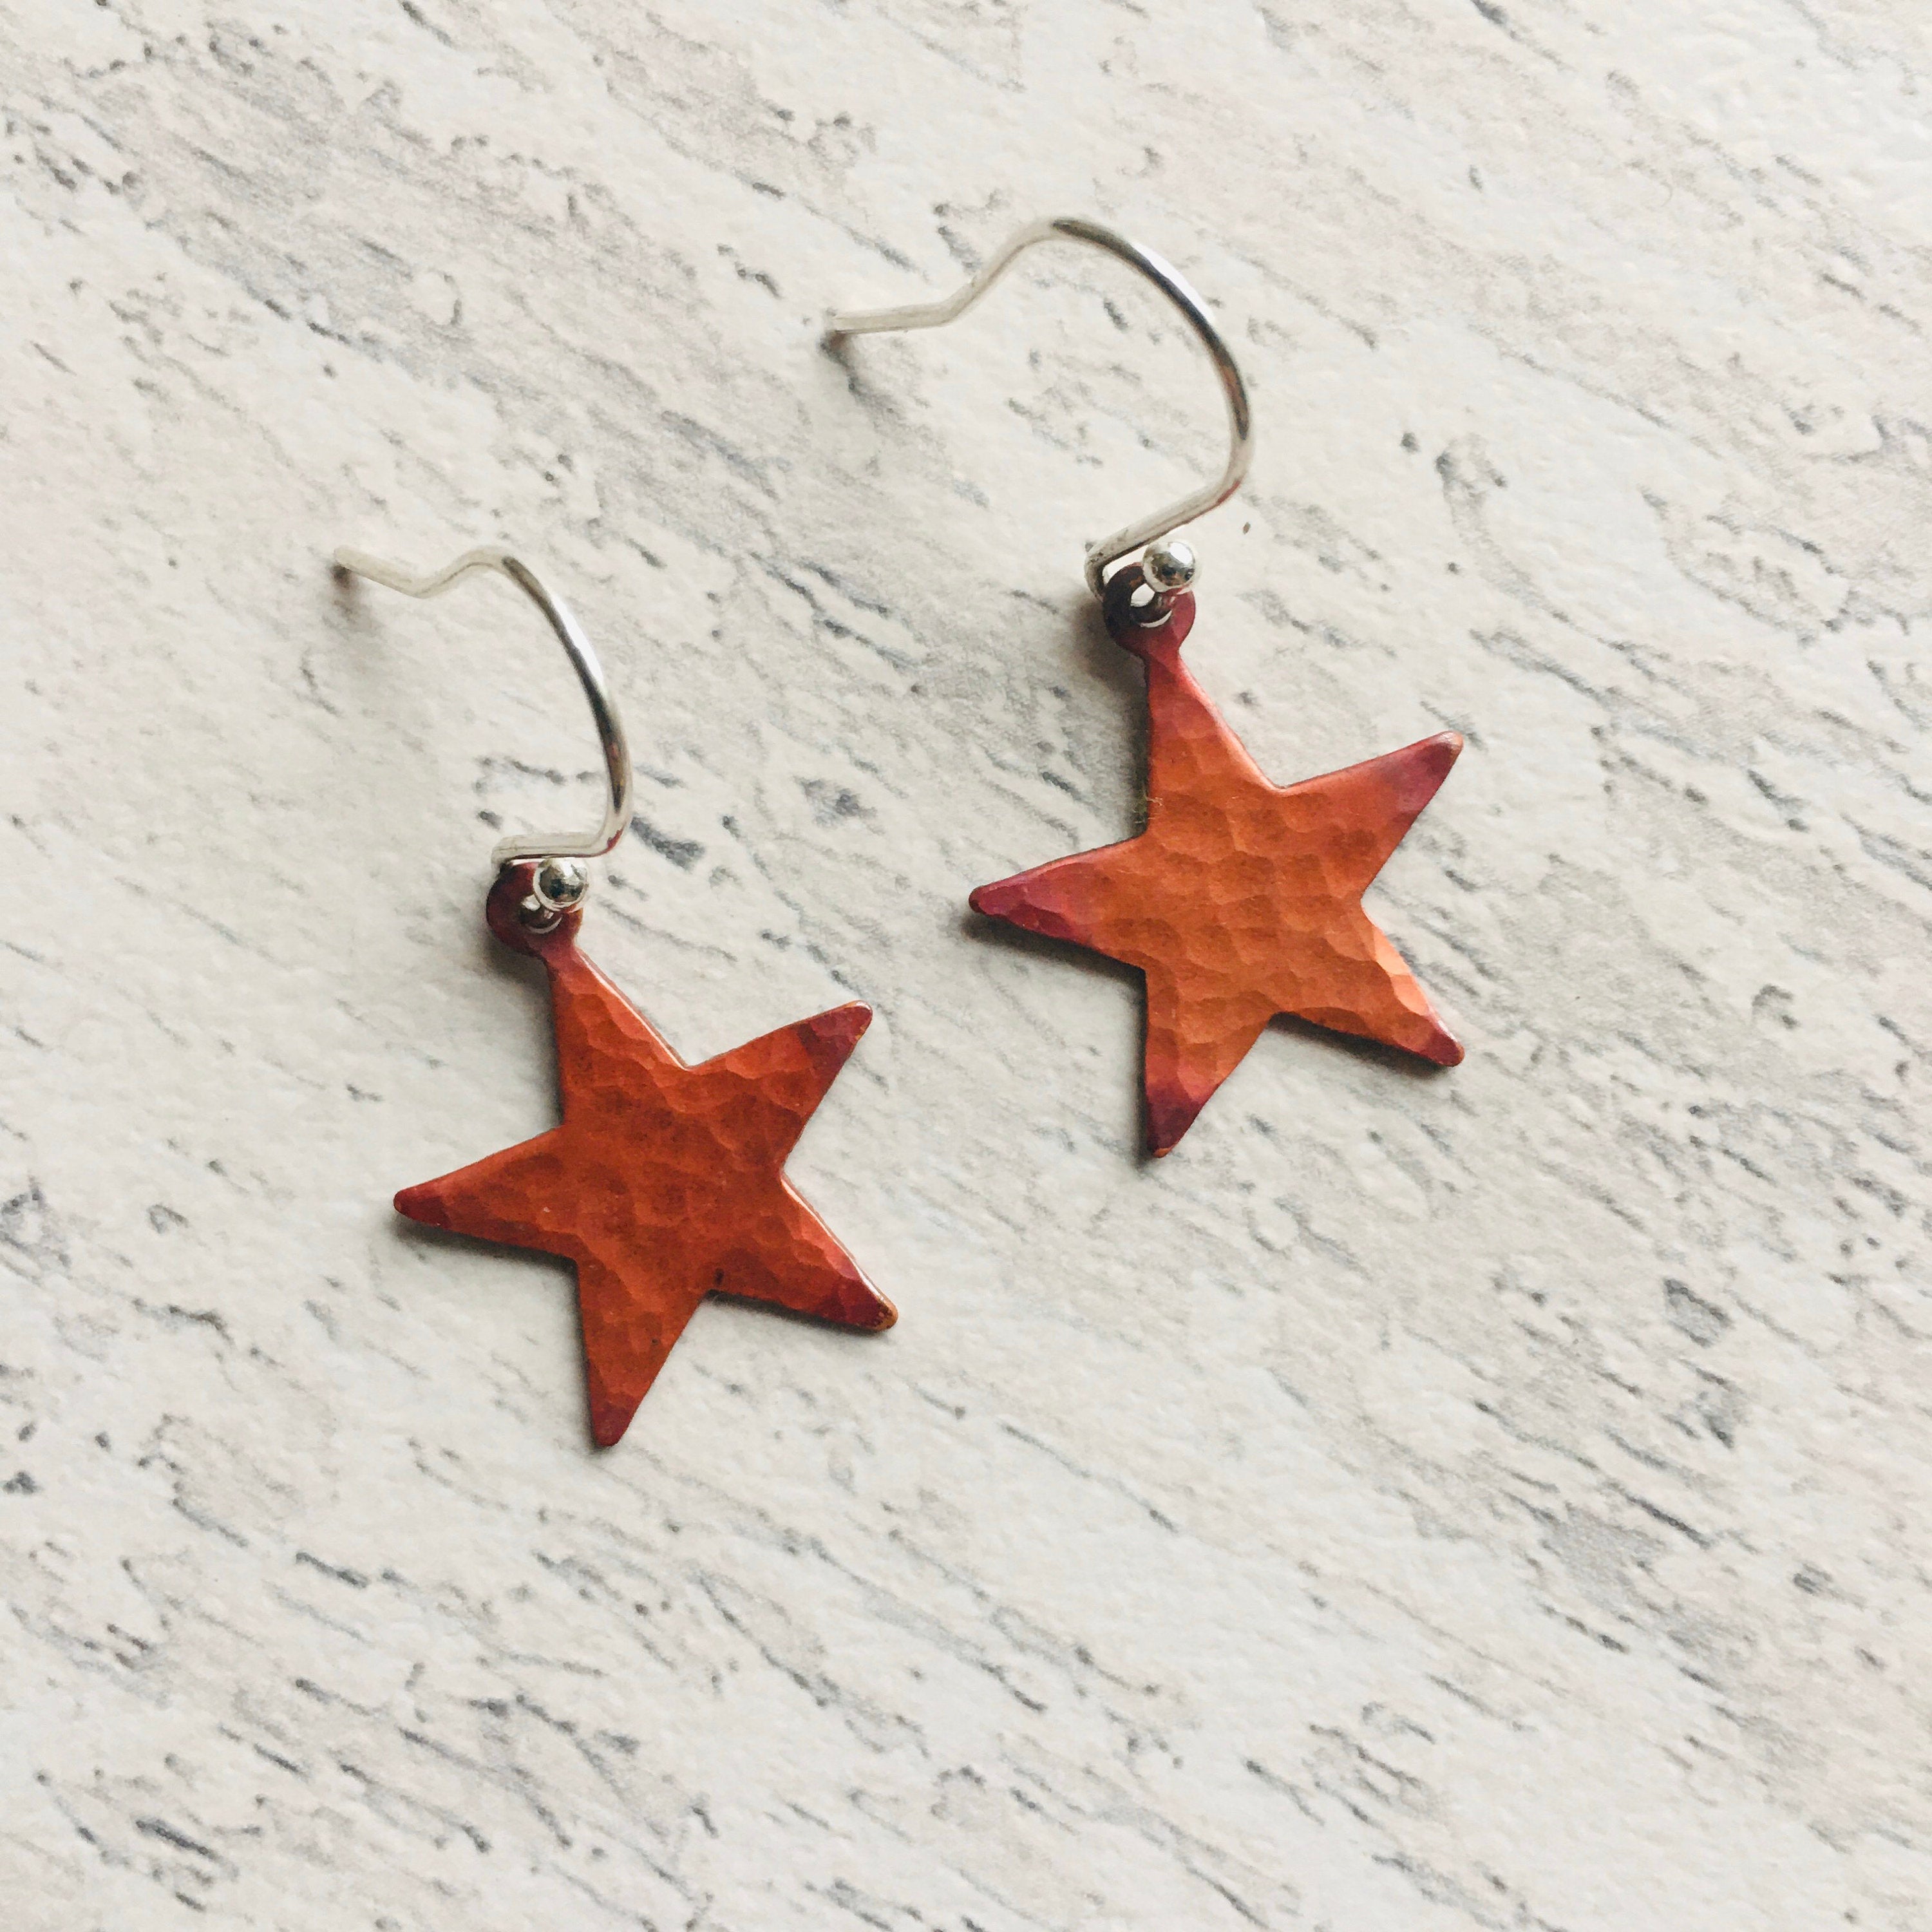 Star Earrings in red patinated copper, and, sterling silver ear findings.